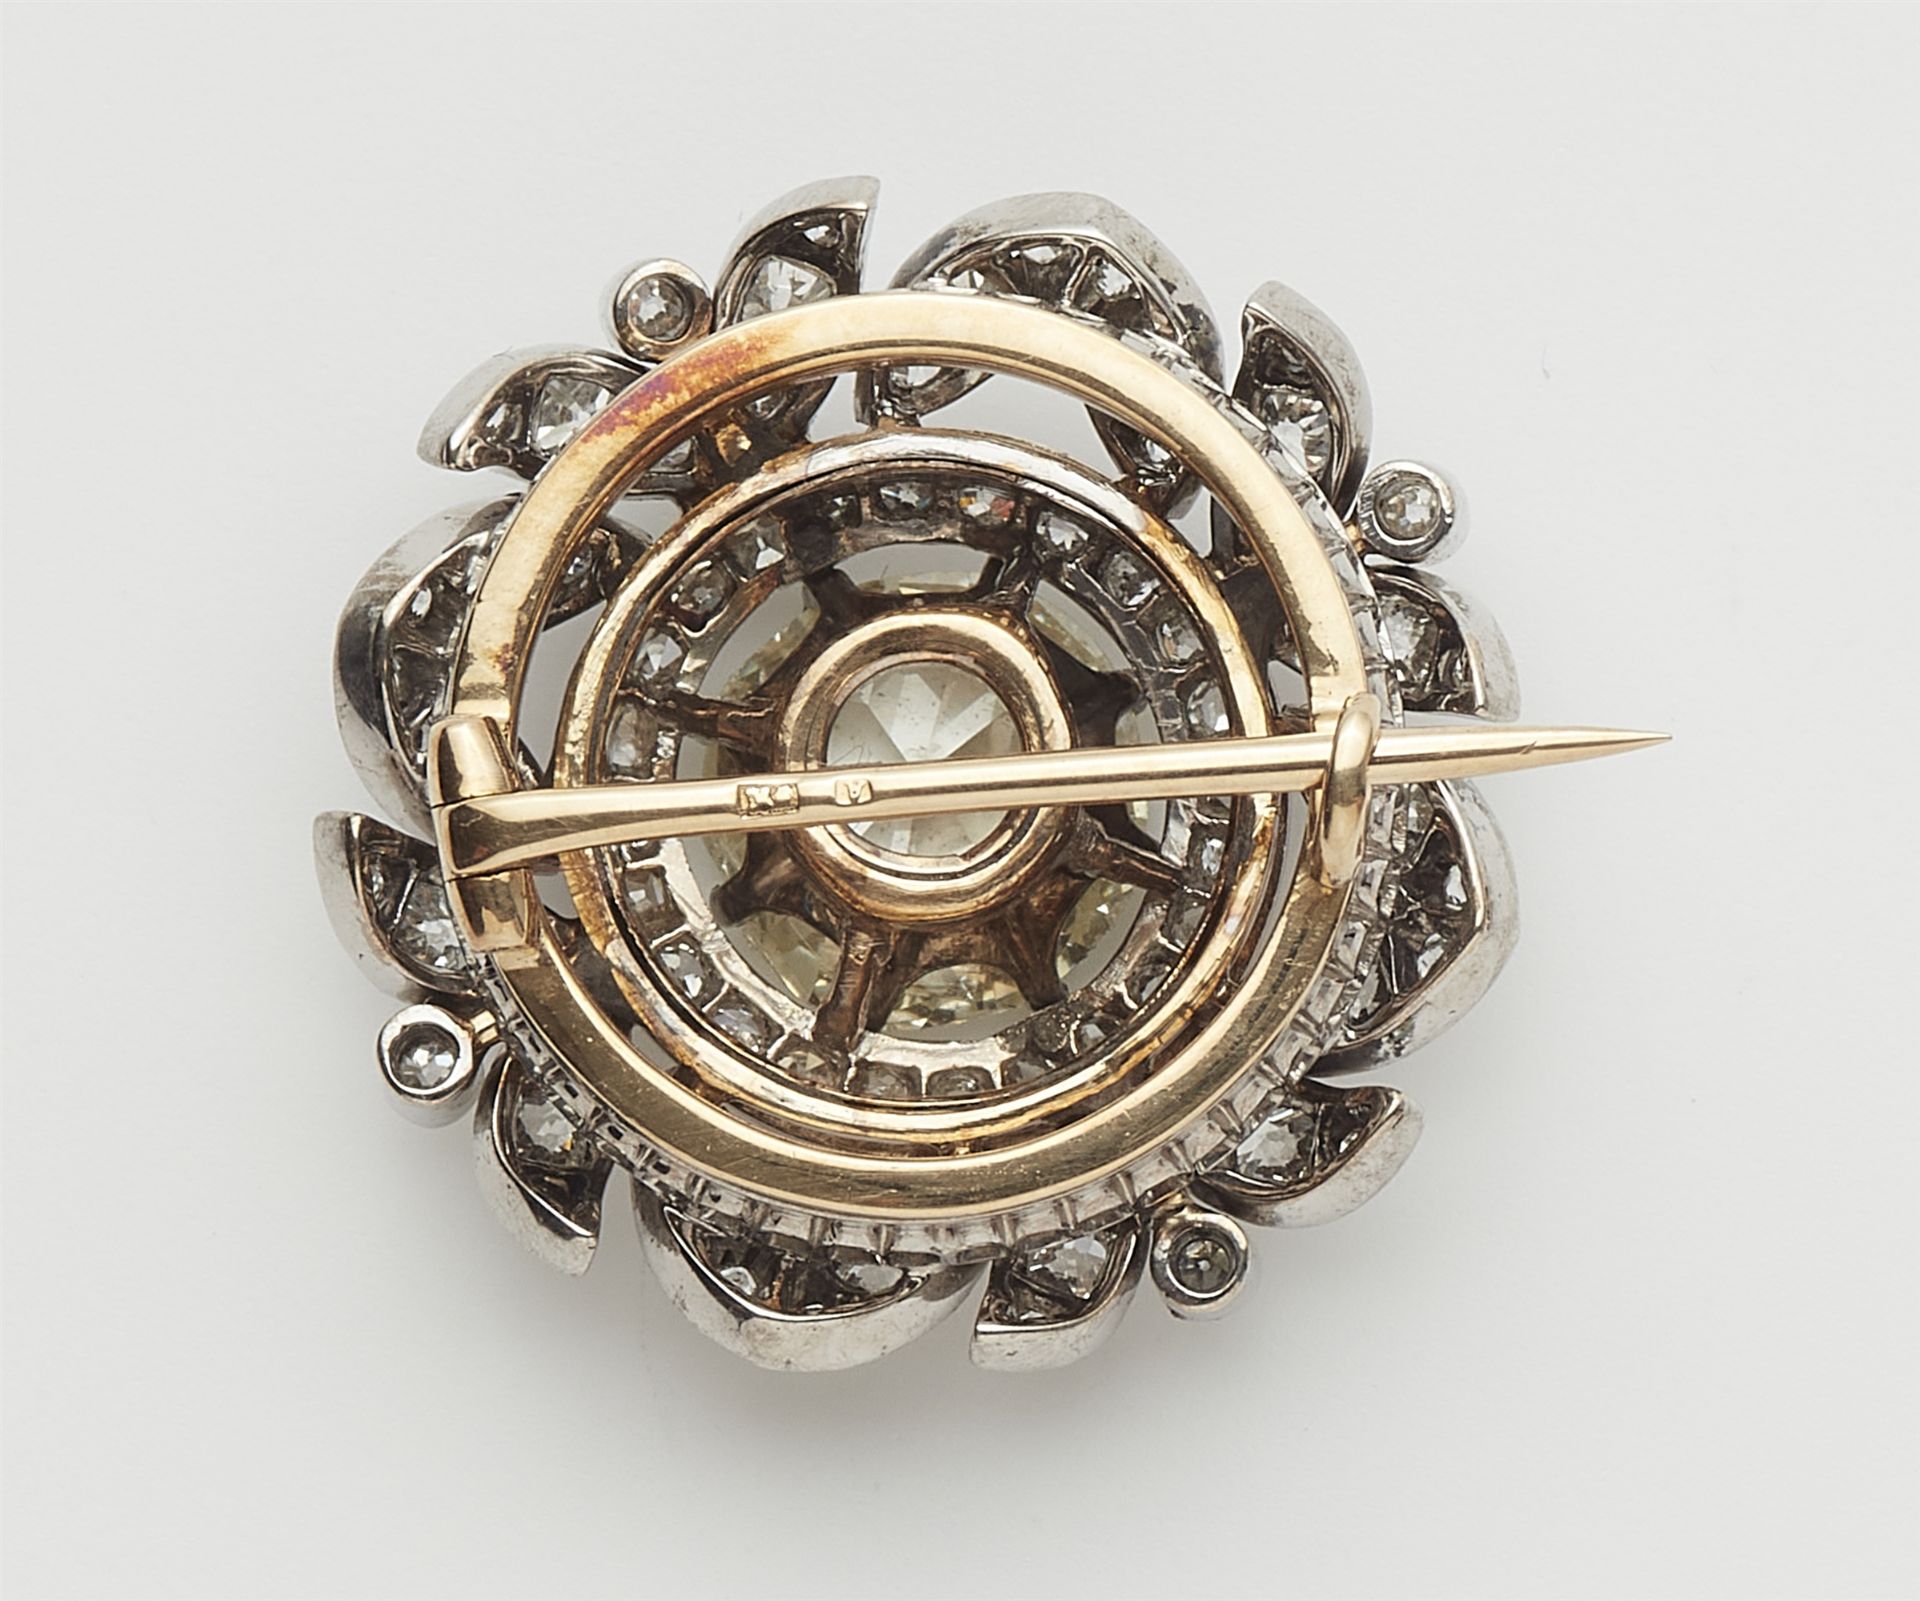 A Viennese 14k gold diamond brooch with a ca. 3.23 ct European old-cut centre stone. - Image 3 of 4